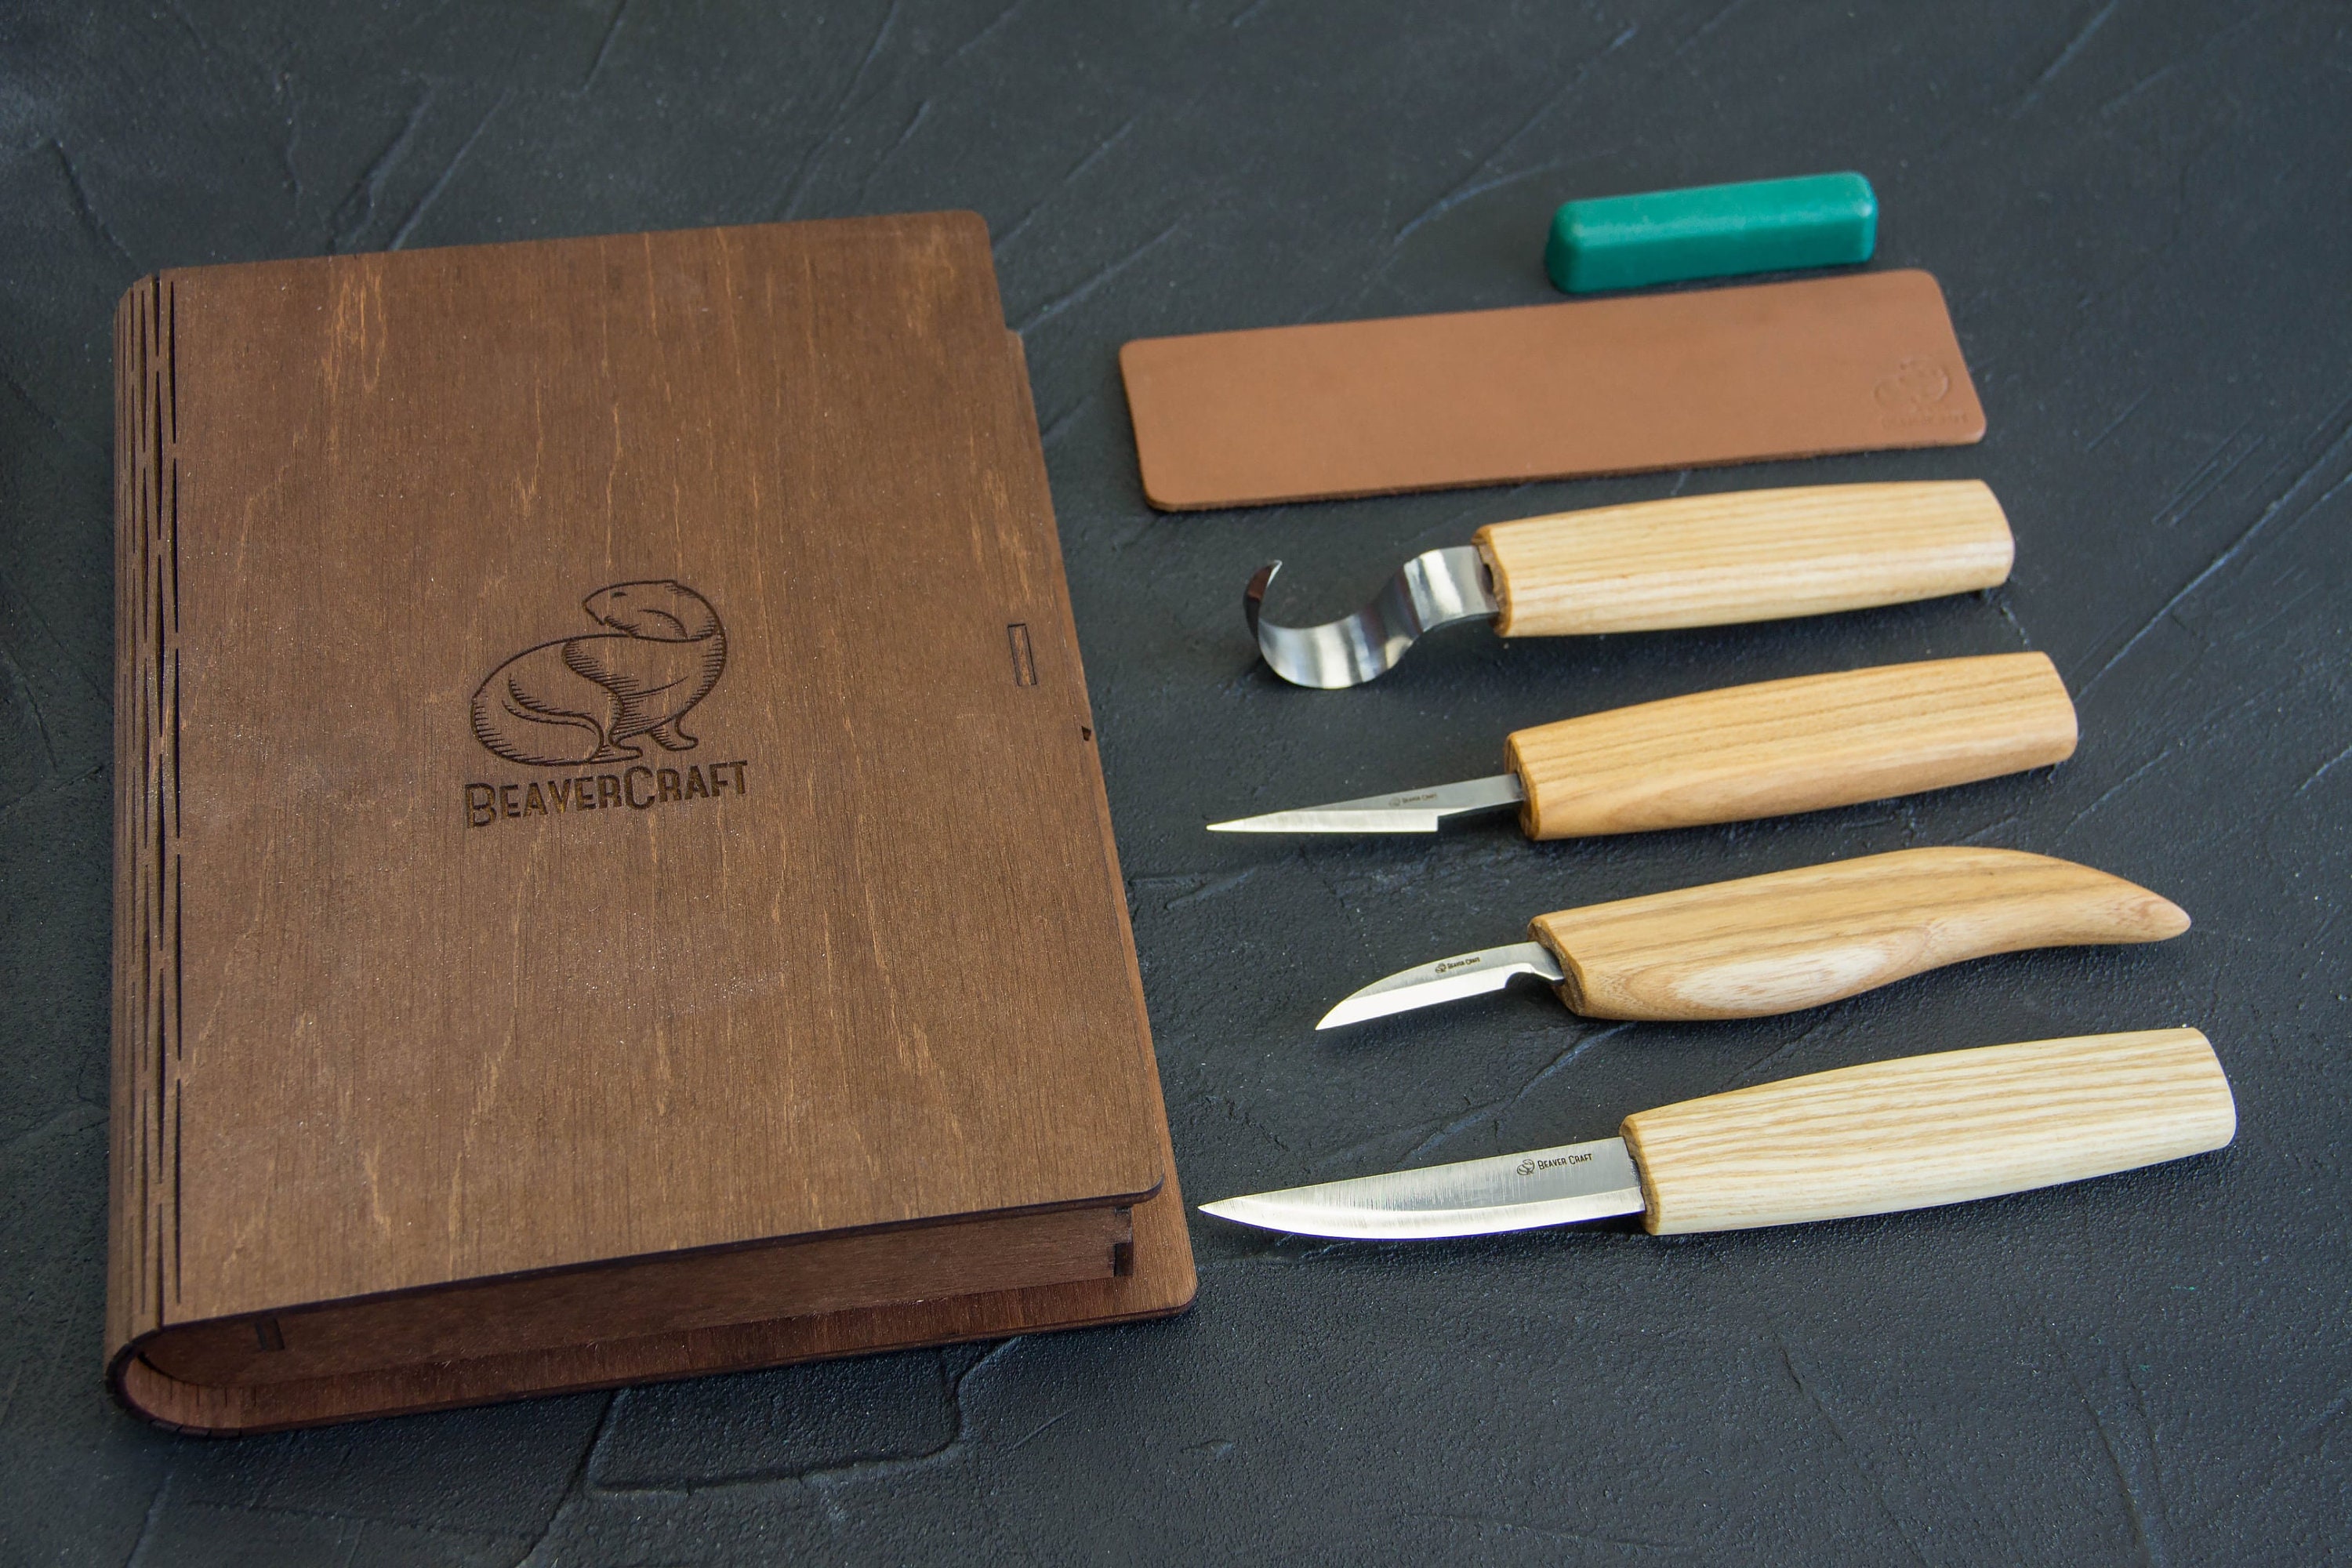 BeaverCraft S09 Book Wood Carving Knife Set in Giftbox